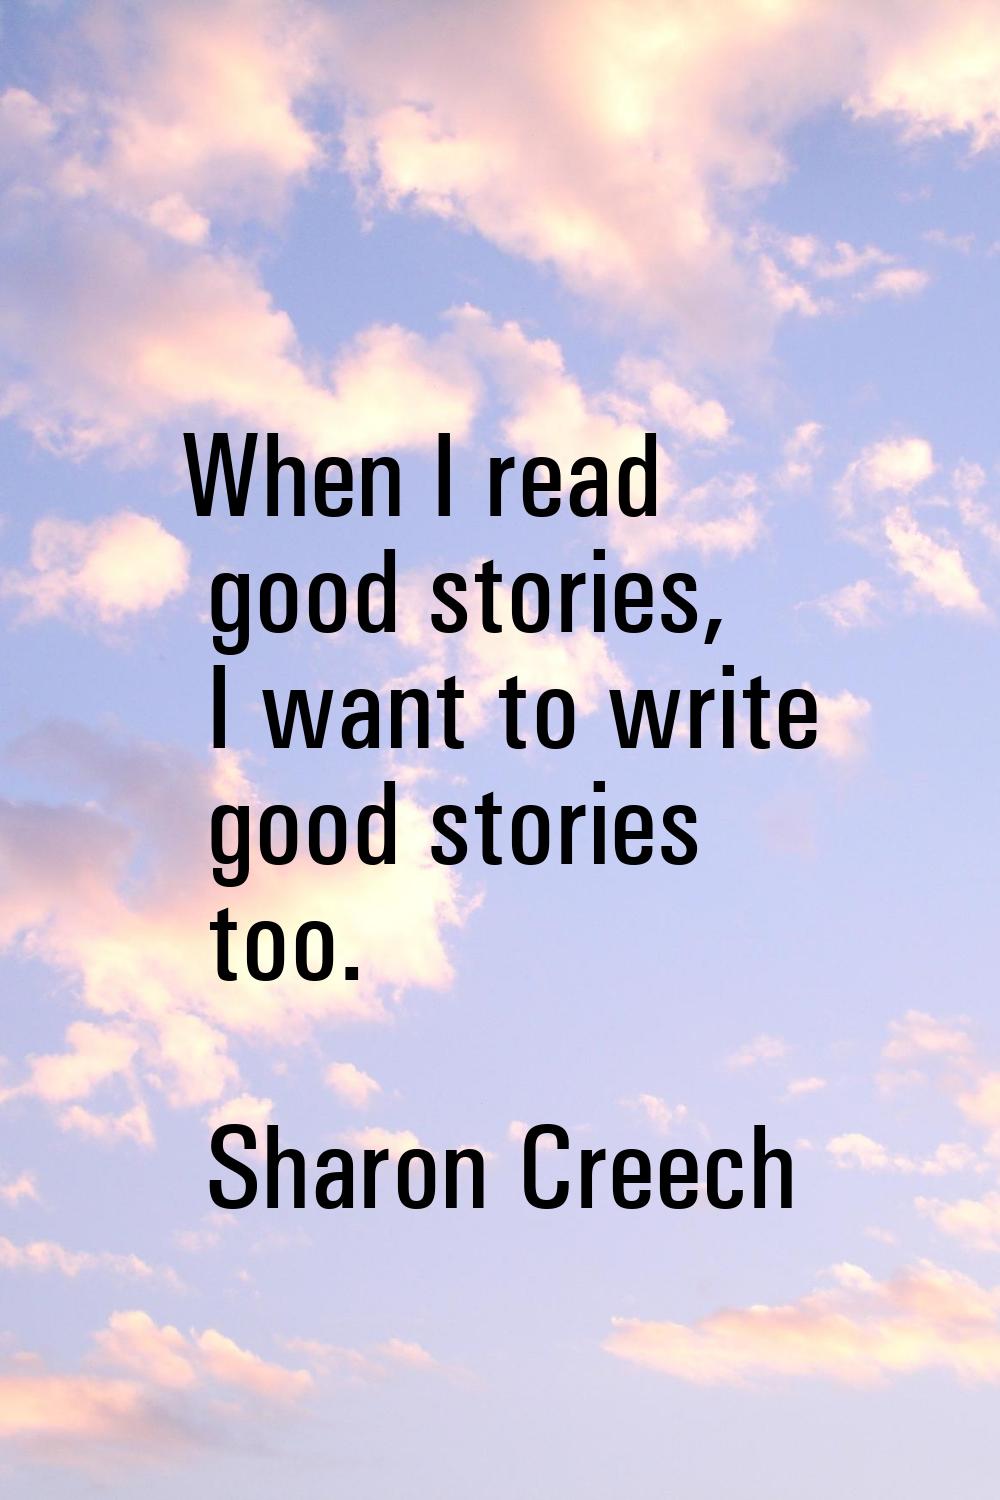 When I read good stories, I want to write good stories too.